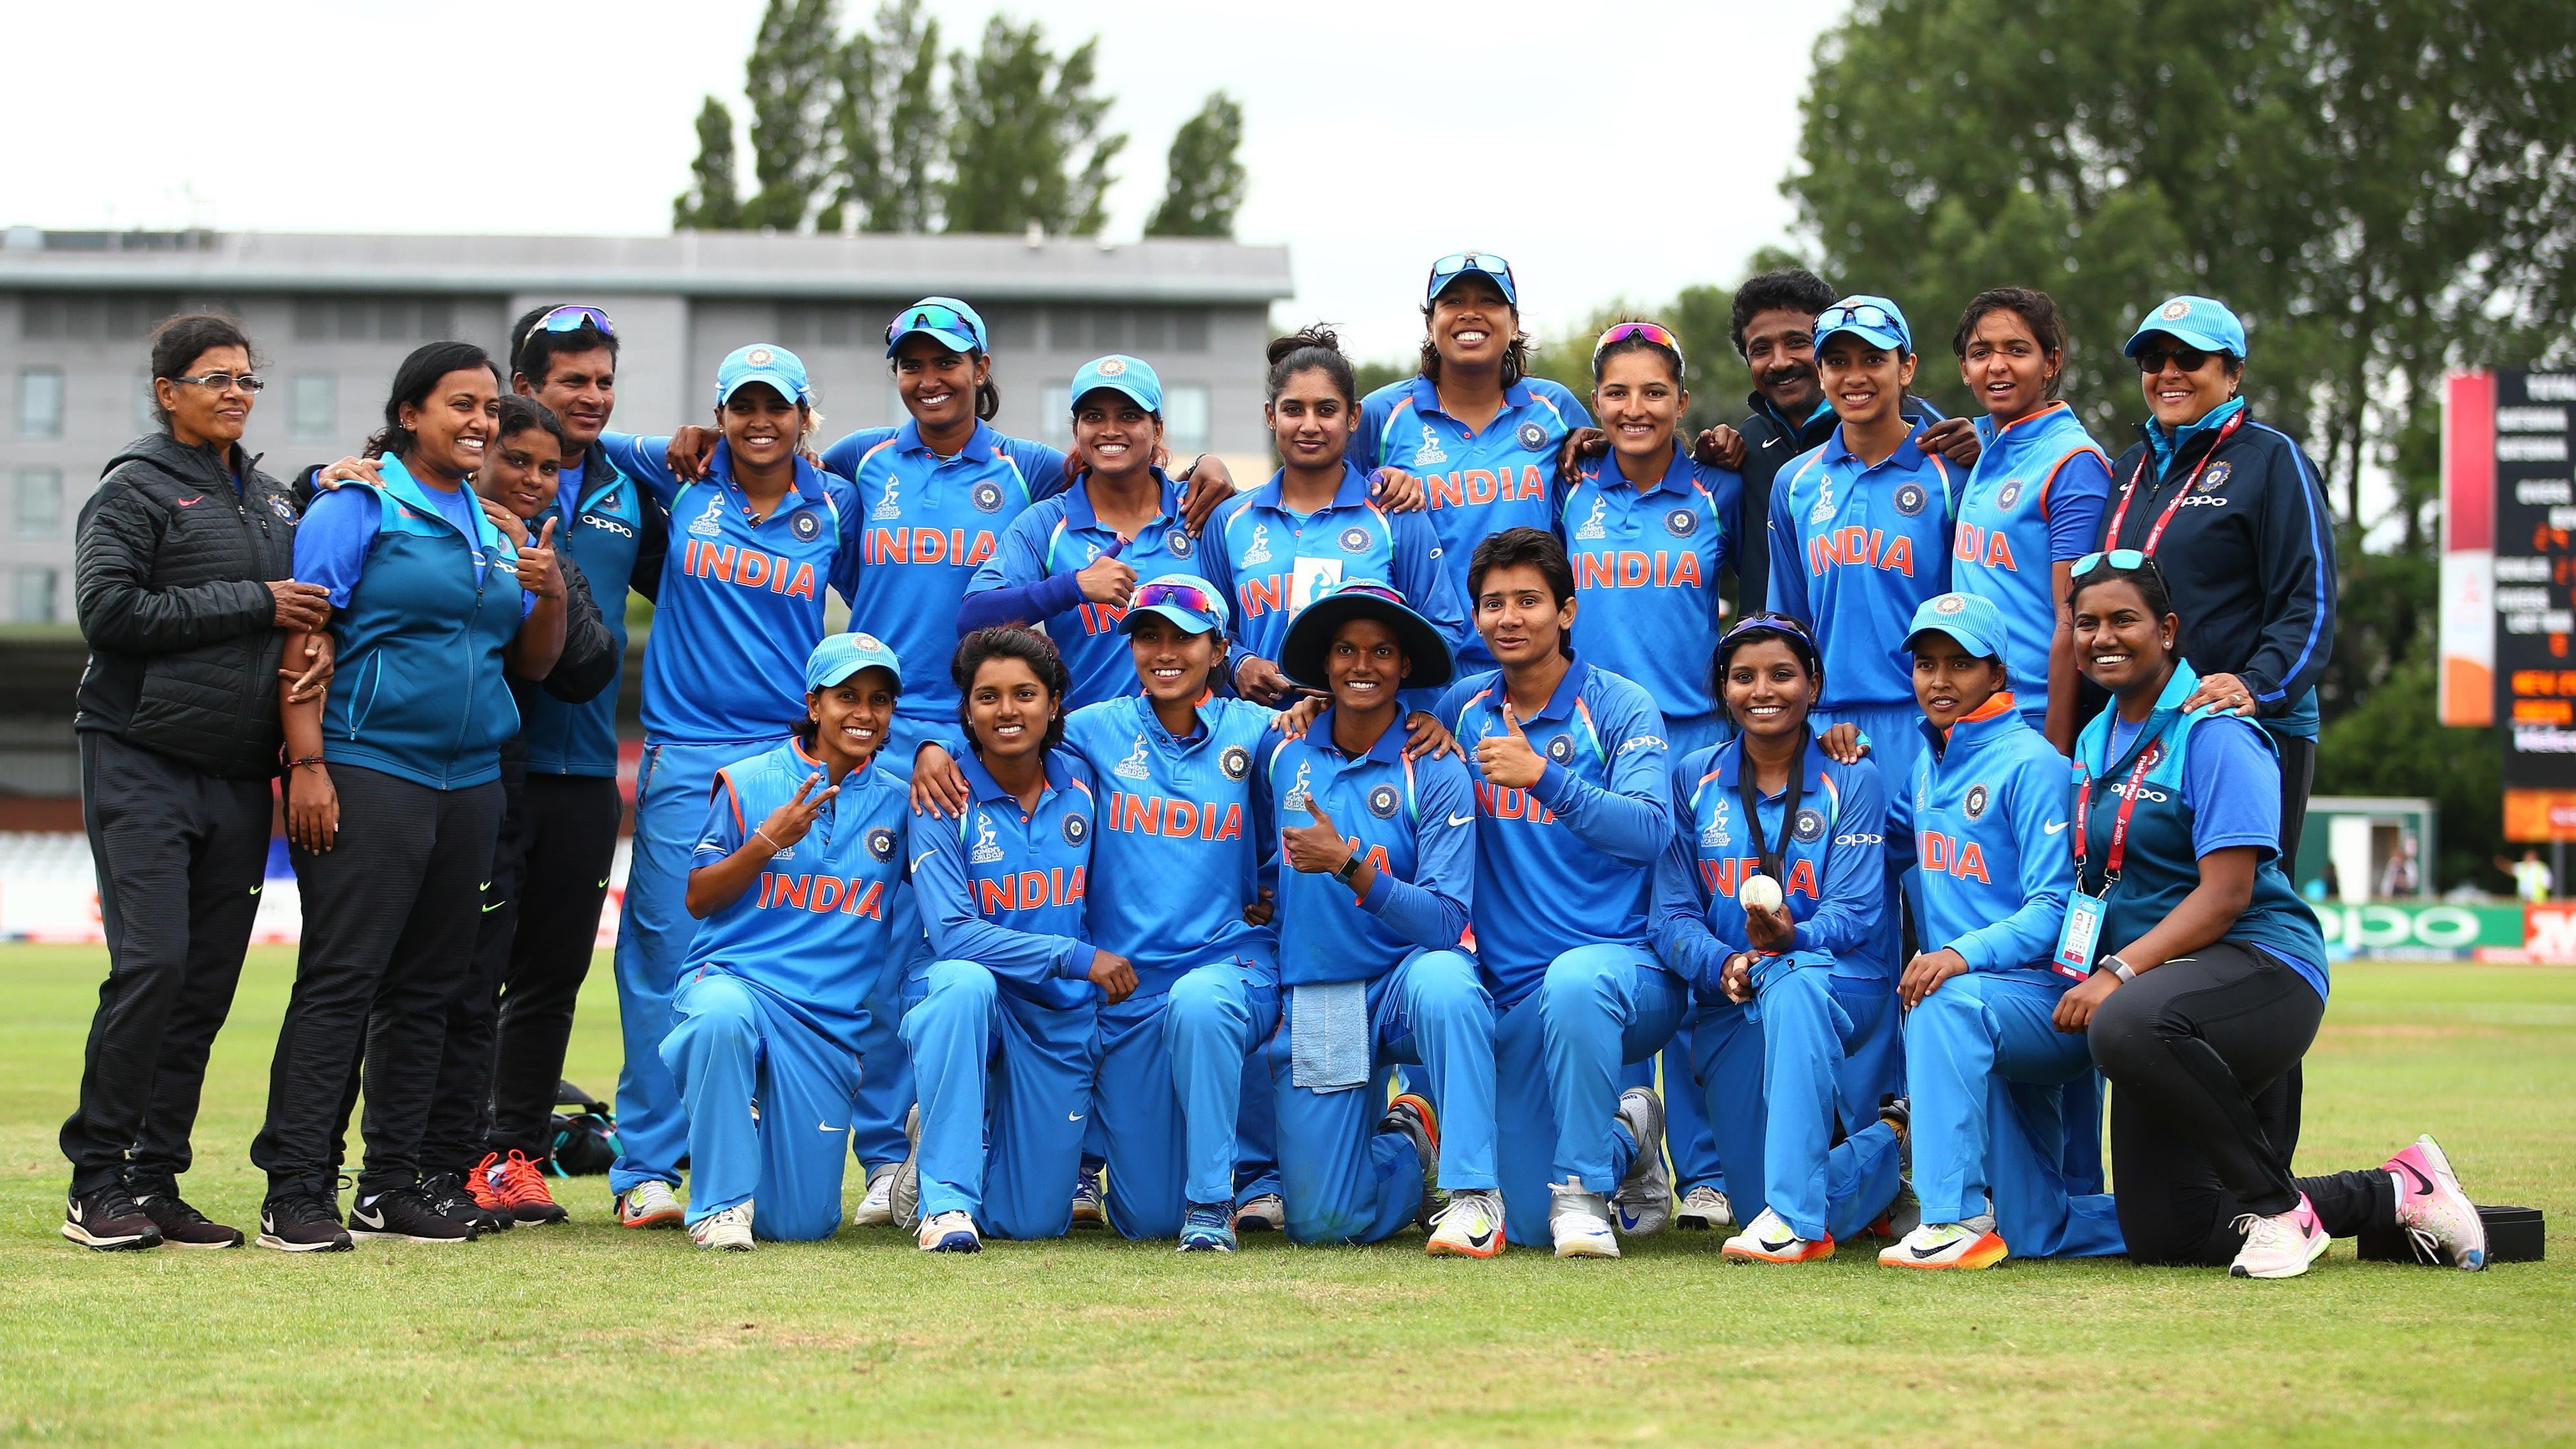 How Indian's women cricket team reached the finals 2017